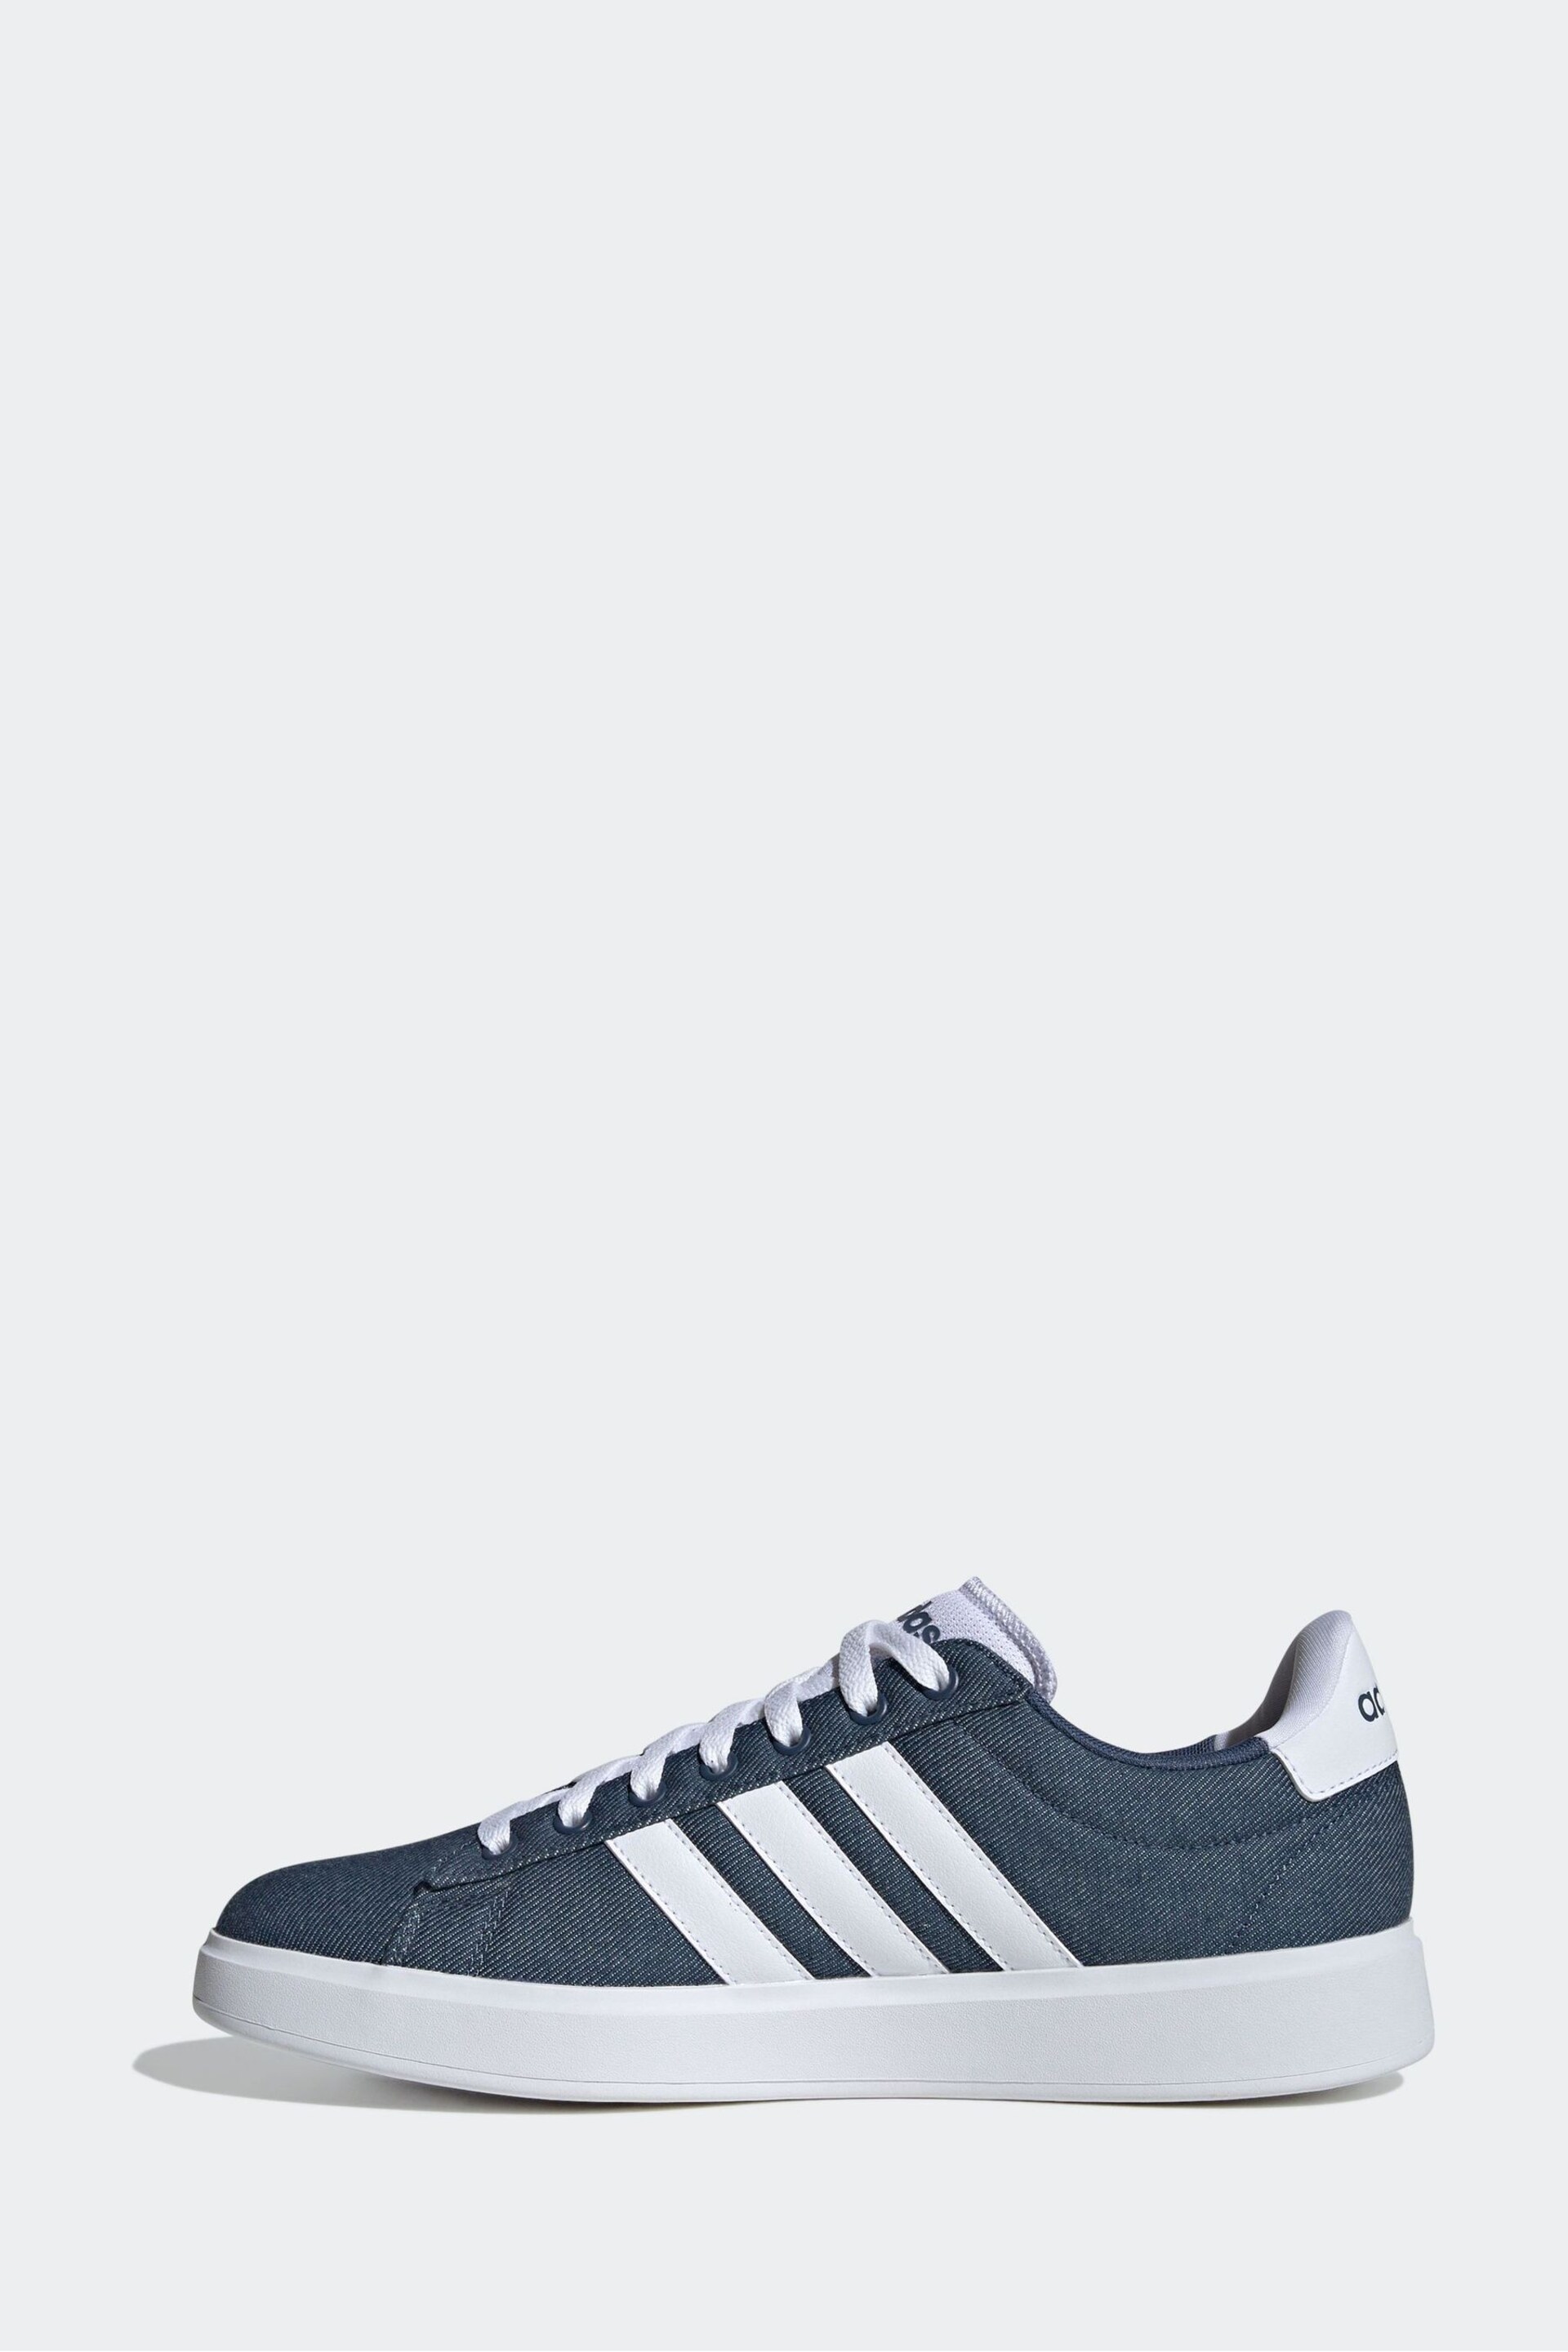 adidas Blue Grand Court 2.0 Trainers - Image 4 of 9